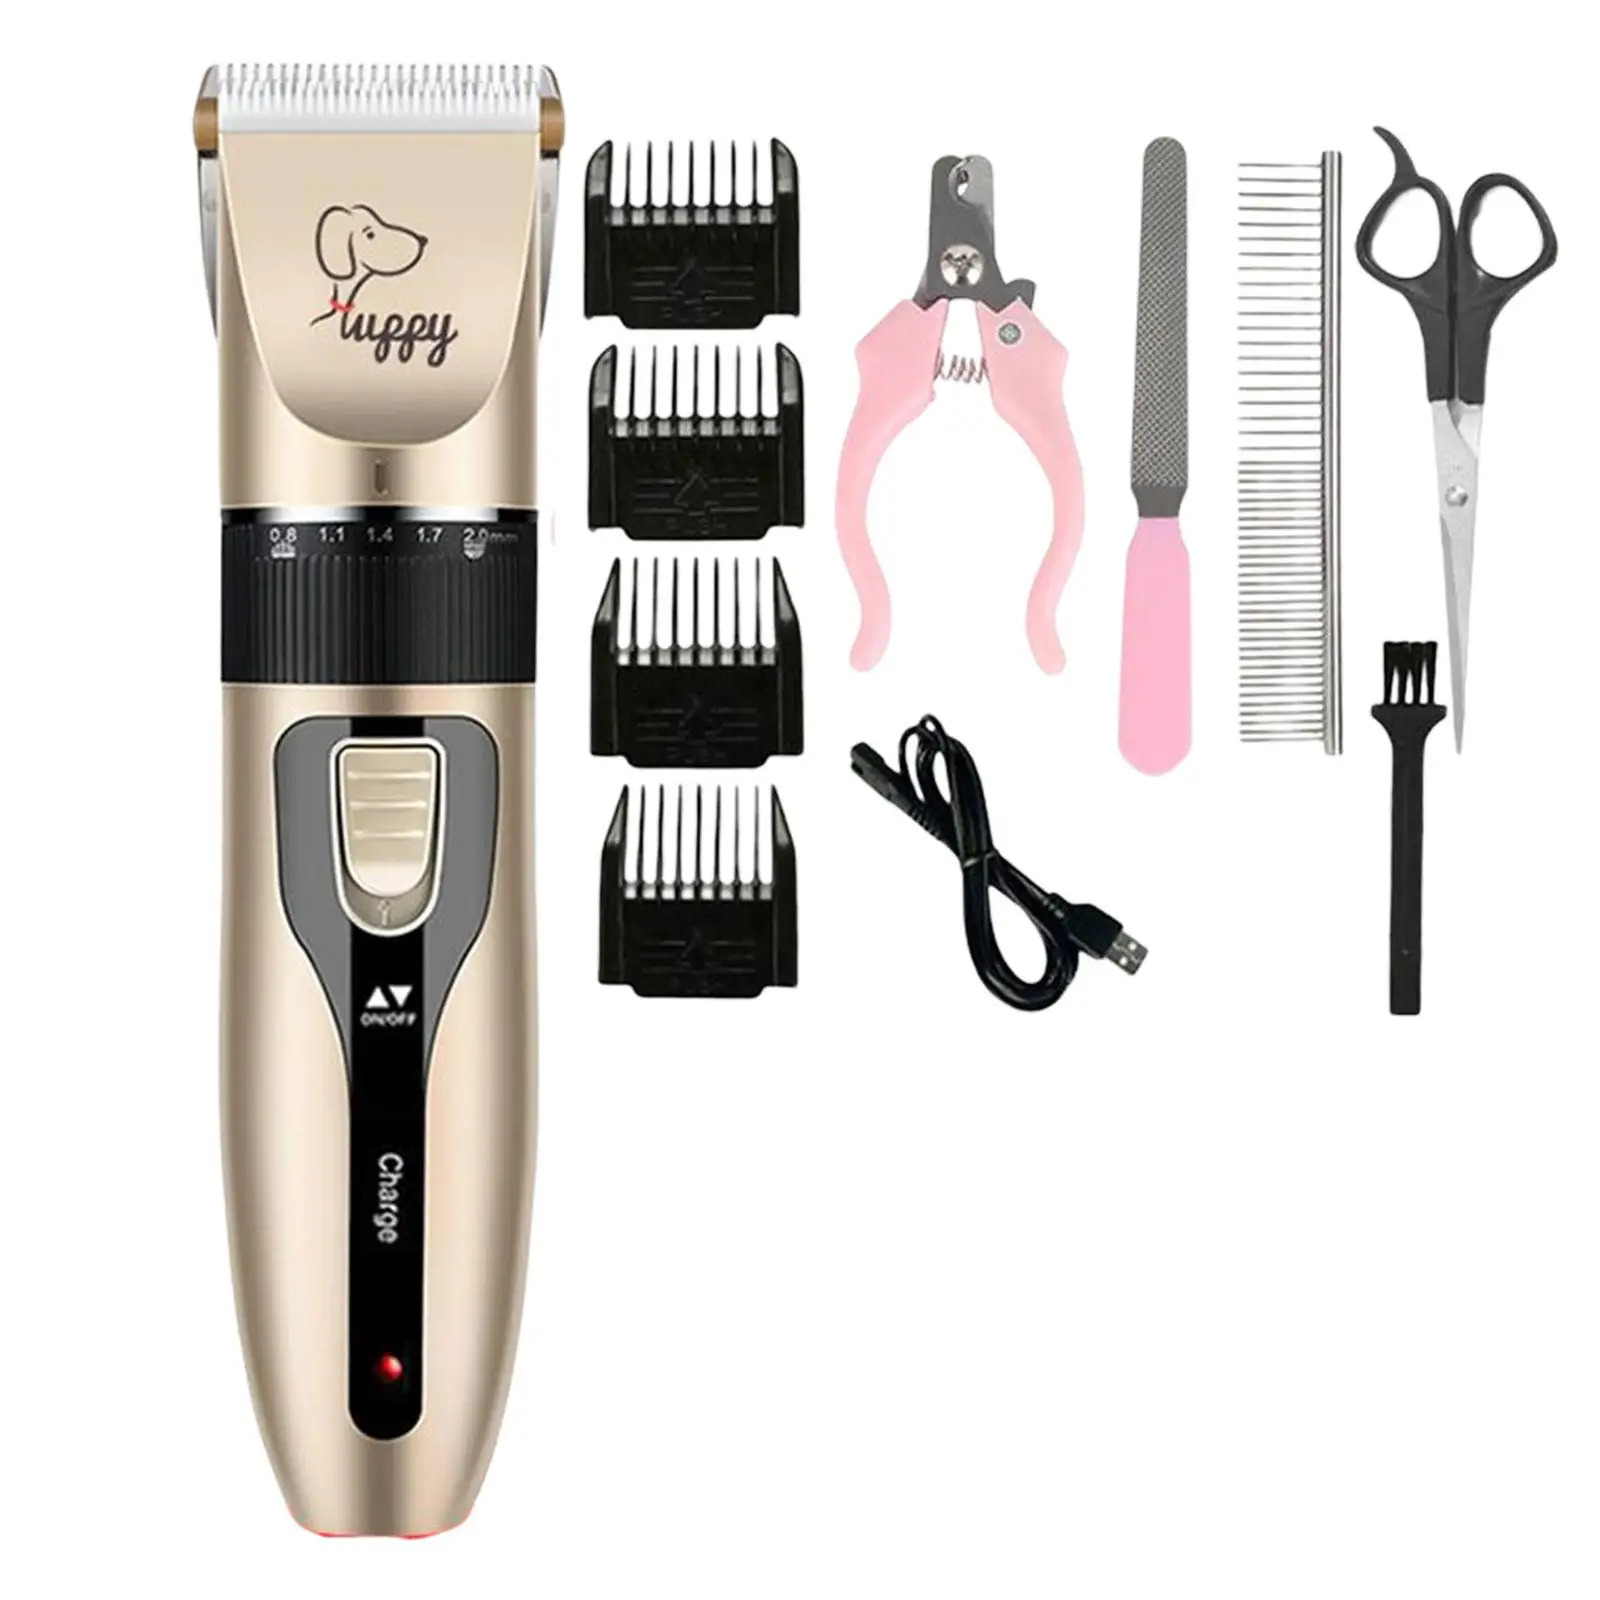 Cordless Dog Hair Clippers with 4 Interchangeable Head Pet Grooming